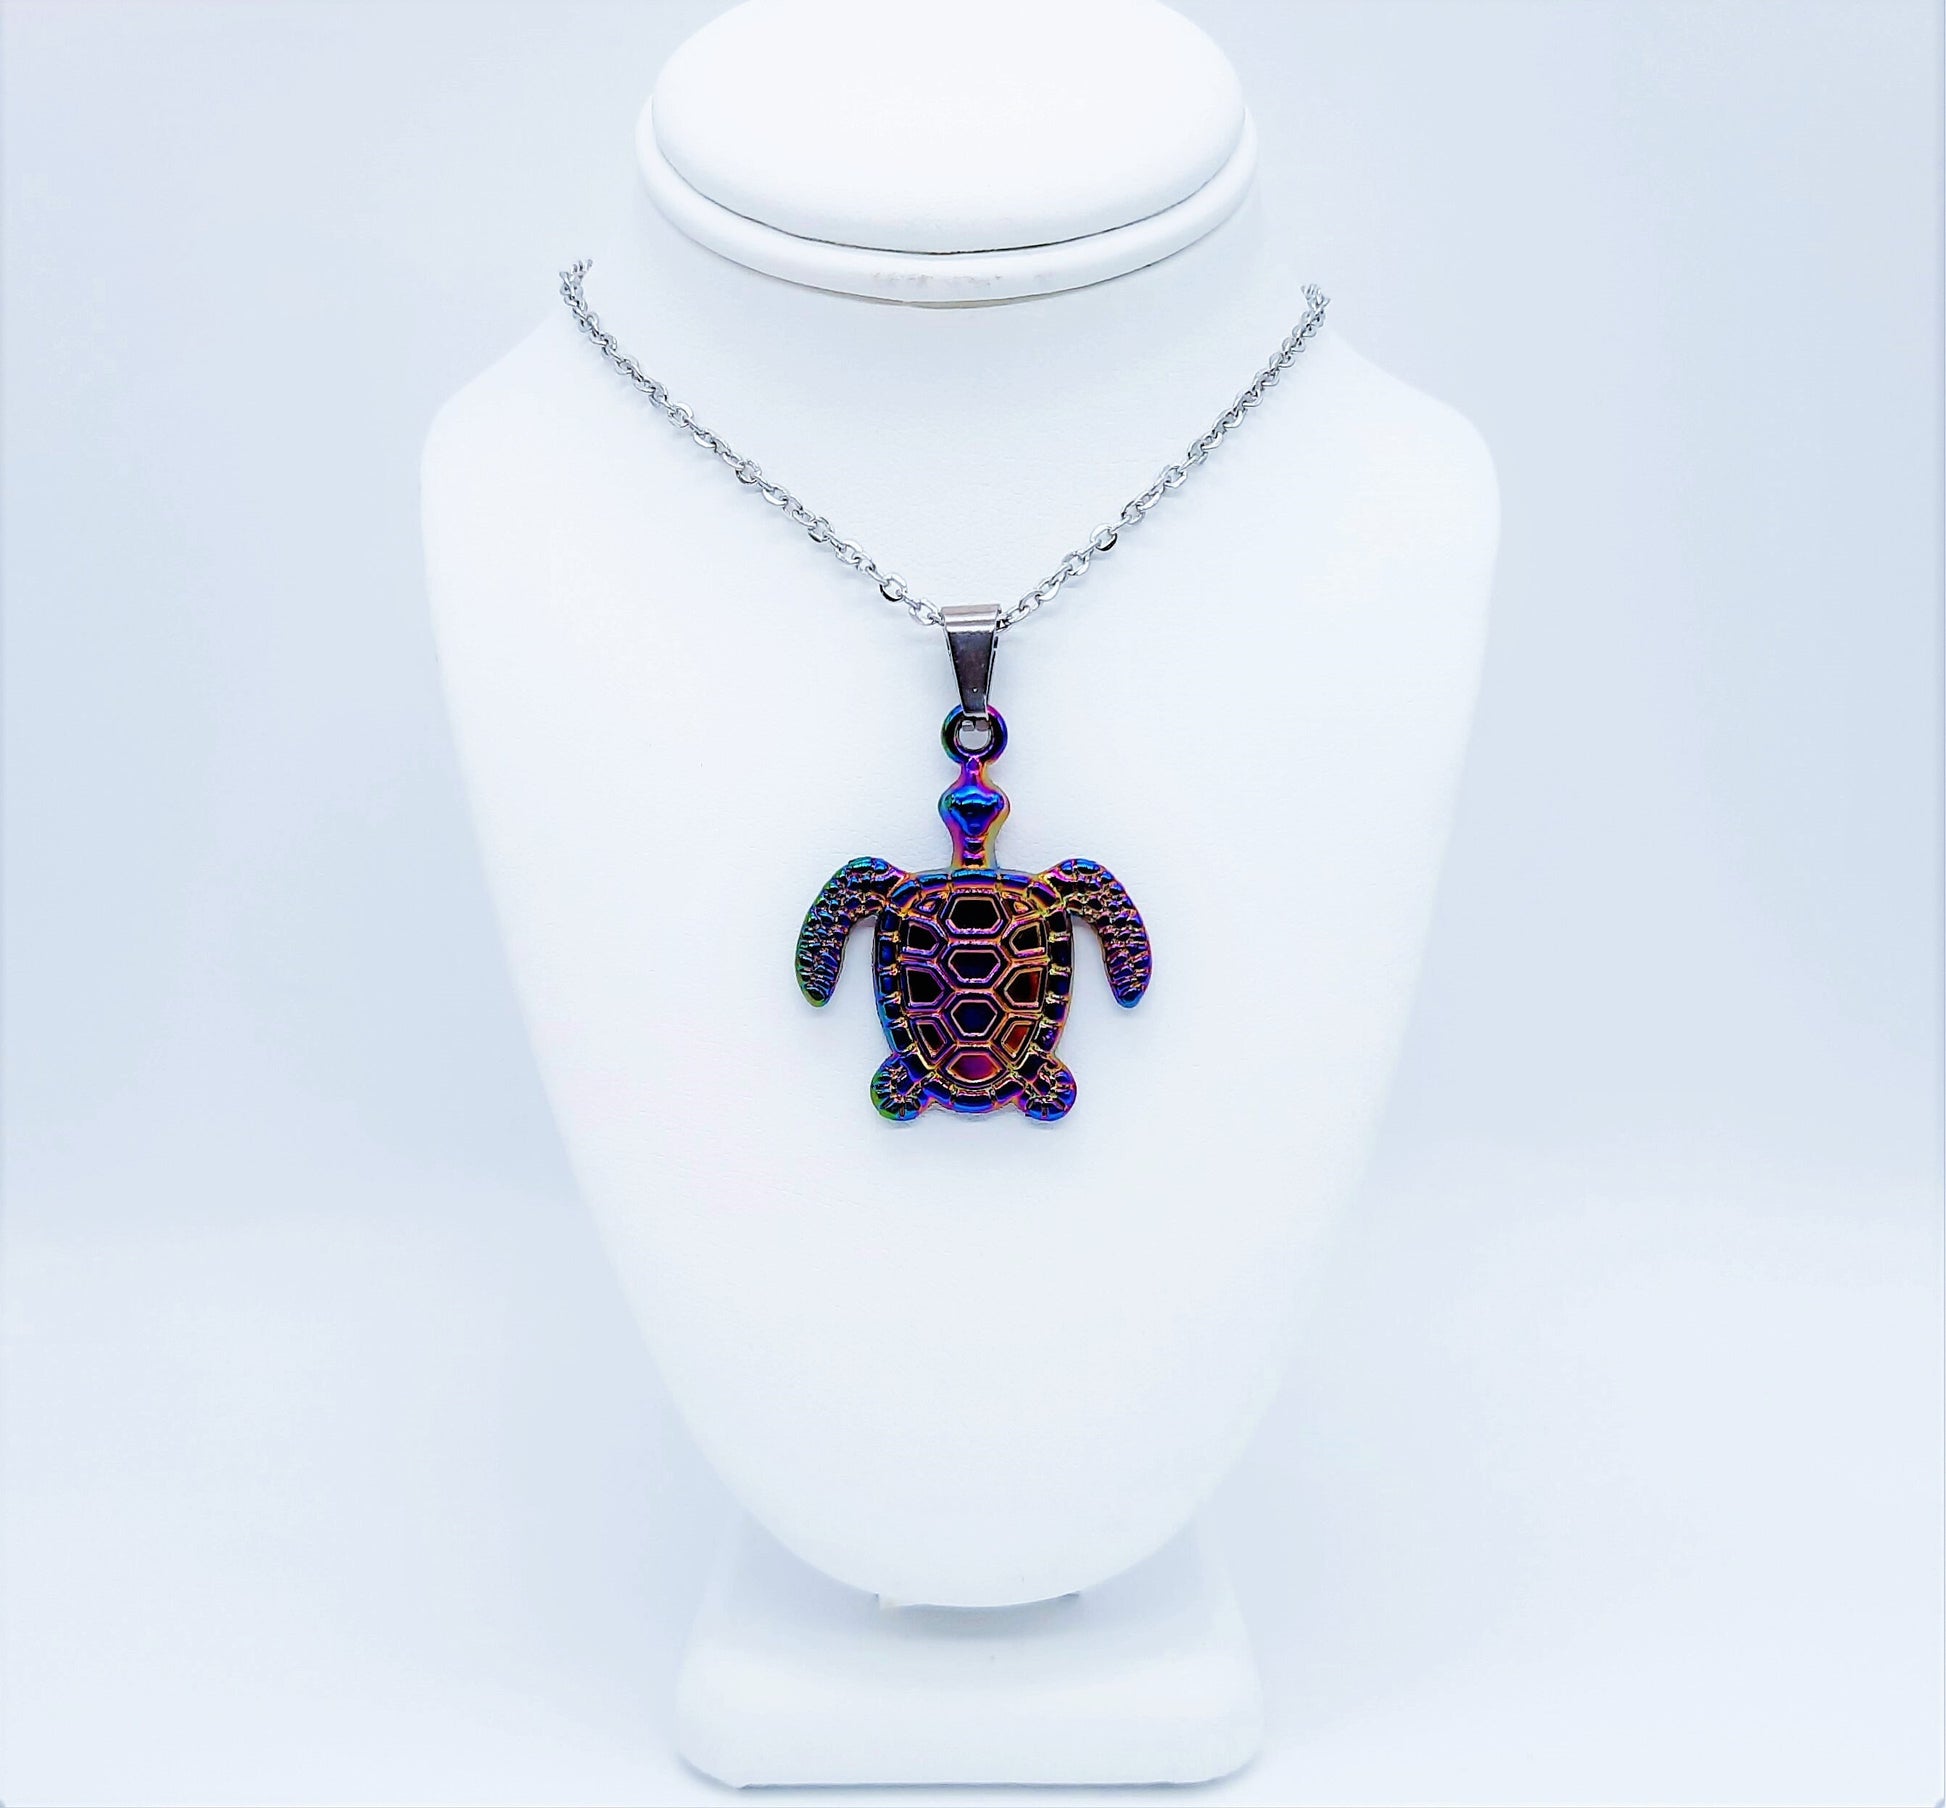 Rainbow Chromium Metal Sea Turtle / Tortoise Necklace - 19" Stainless Steel Hypoallergenic Chain - Lobster Claw Closure - Alloy Pendant